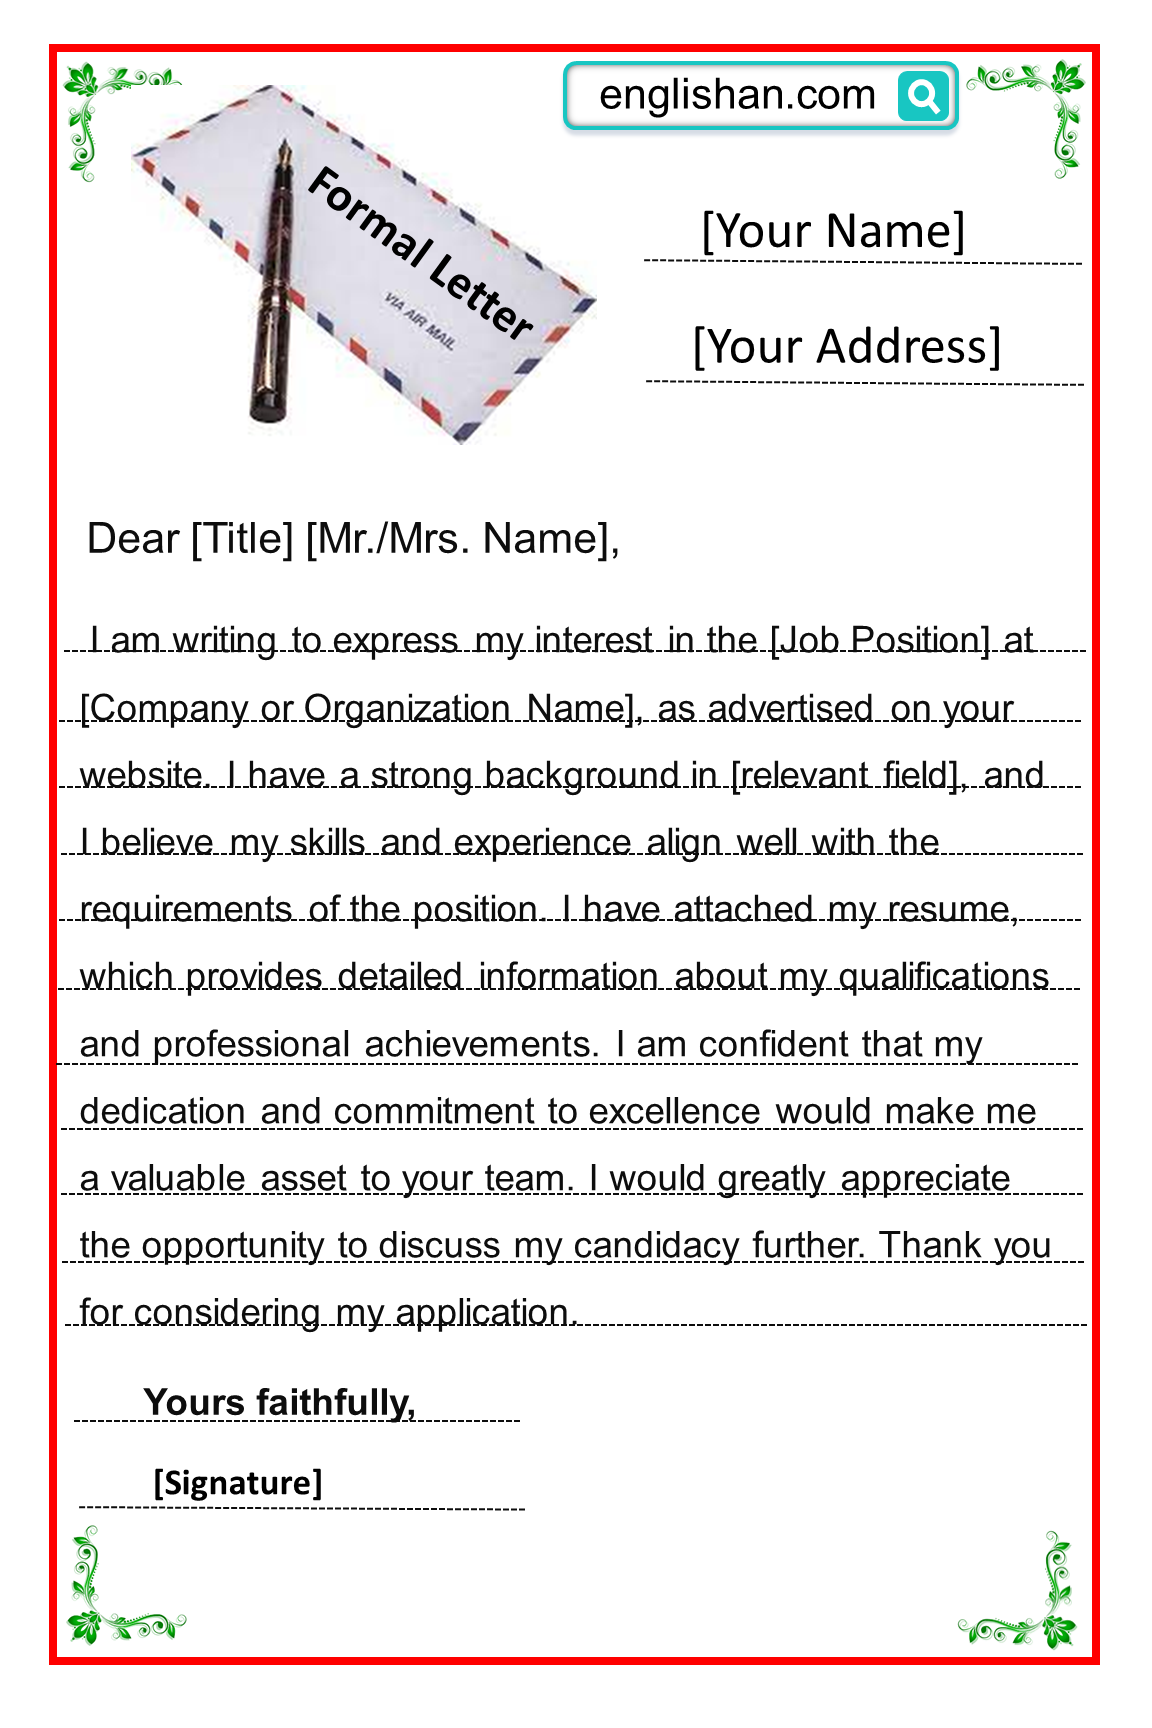 write formal letter in English